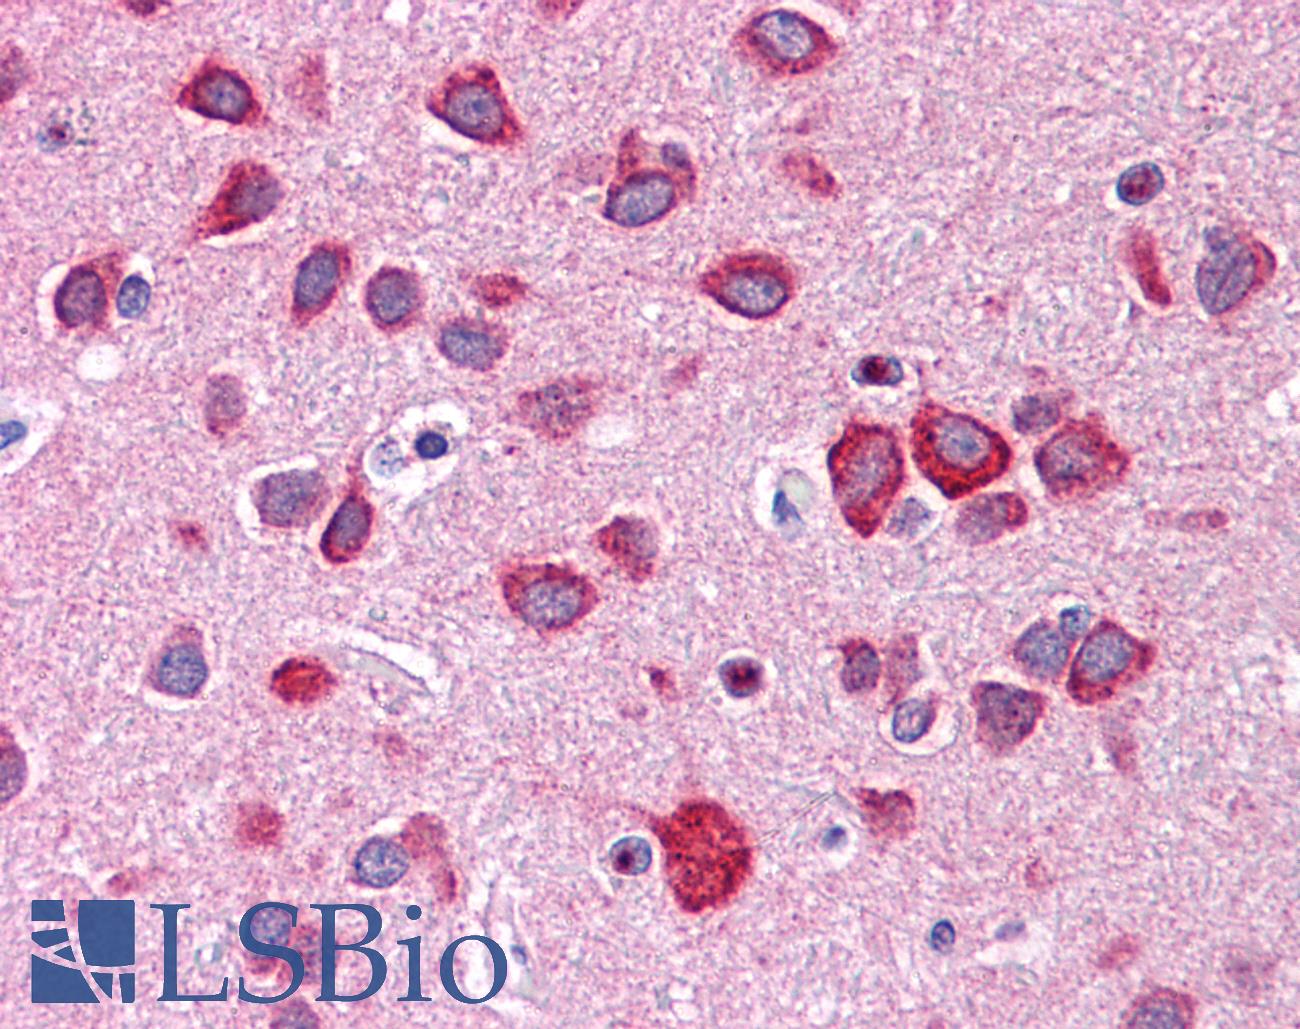 Calneuron-1 / CALN1 Antibody - Anti-CALN1 / Calneuron-1 antibody IHC of human brain, cortex. Immunohistochemistry of formalin-fixed, paraffin-embedded tissue after heat-induced antigen retrieval. Antibody concentration 2.5 ug/ml.